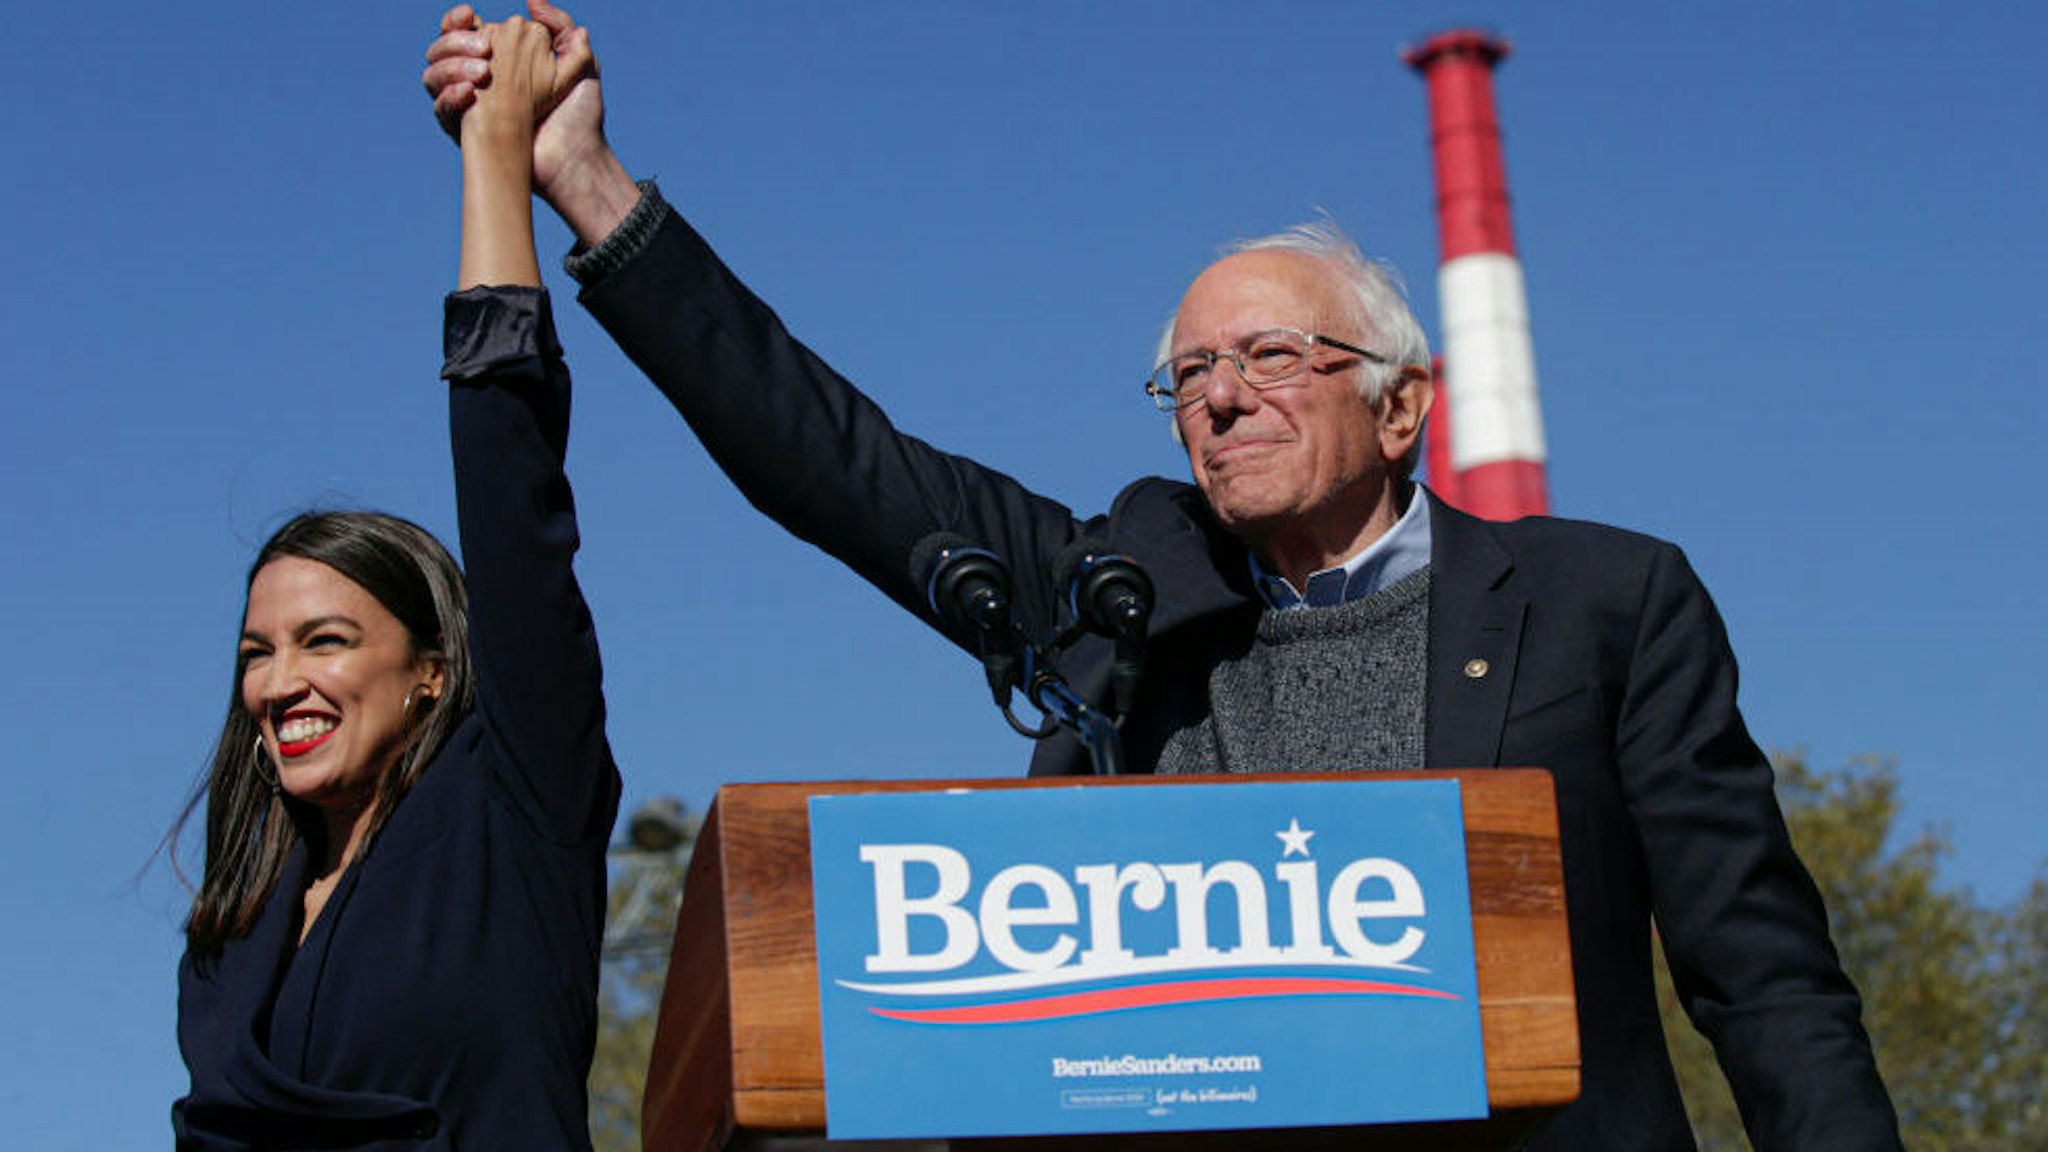 Rep. Alexandria Ocasio-Cortez (D-NY) endorses Democratic presidential candidate, Sen. Bernie Sanders (I-VT) at a campaign rally in Queensbridge Park on October 19, 2019 in the Queens borough of New York City. This is Sanders' first rally since he paused his campaign for the nomination due to health problems. (Photo by Kena Betancur/Getty Images)